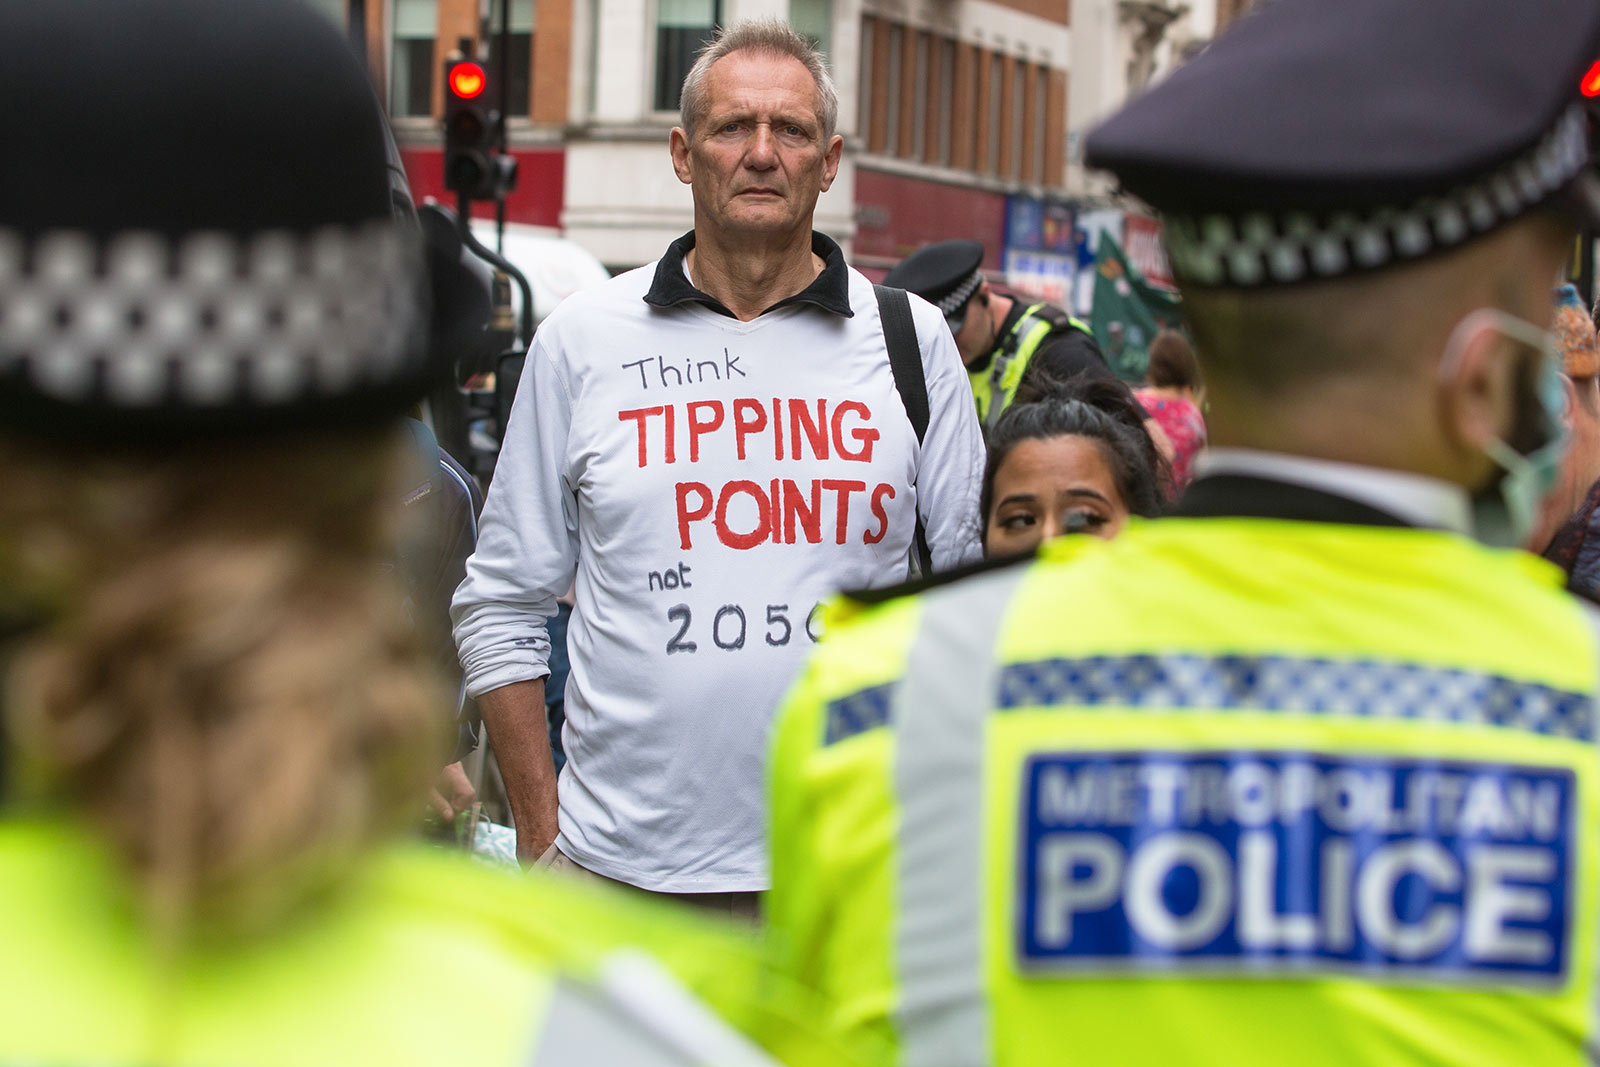 An environmental activist from Extinction Rebellion wears a t-shirt referring to climate tipping points